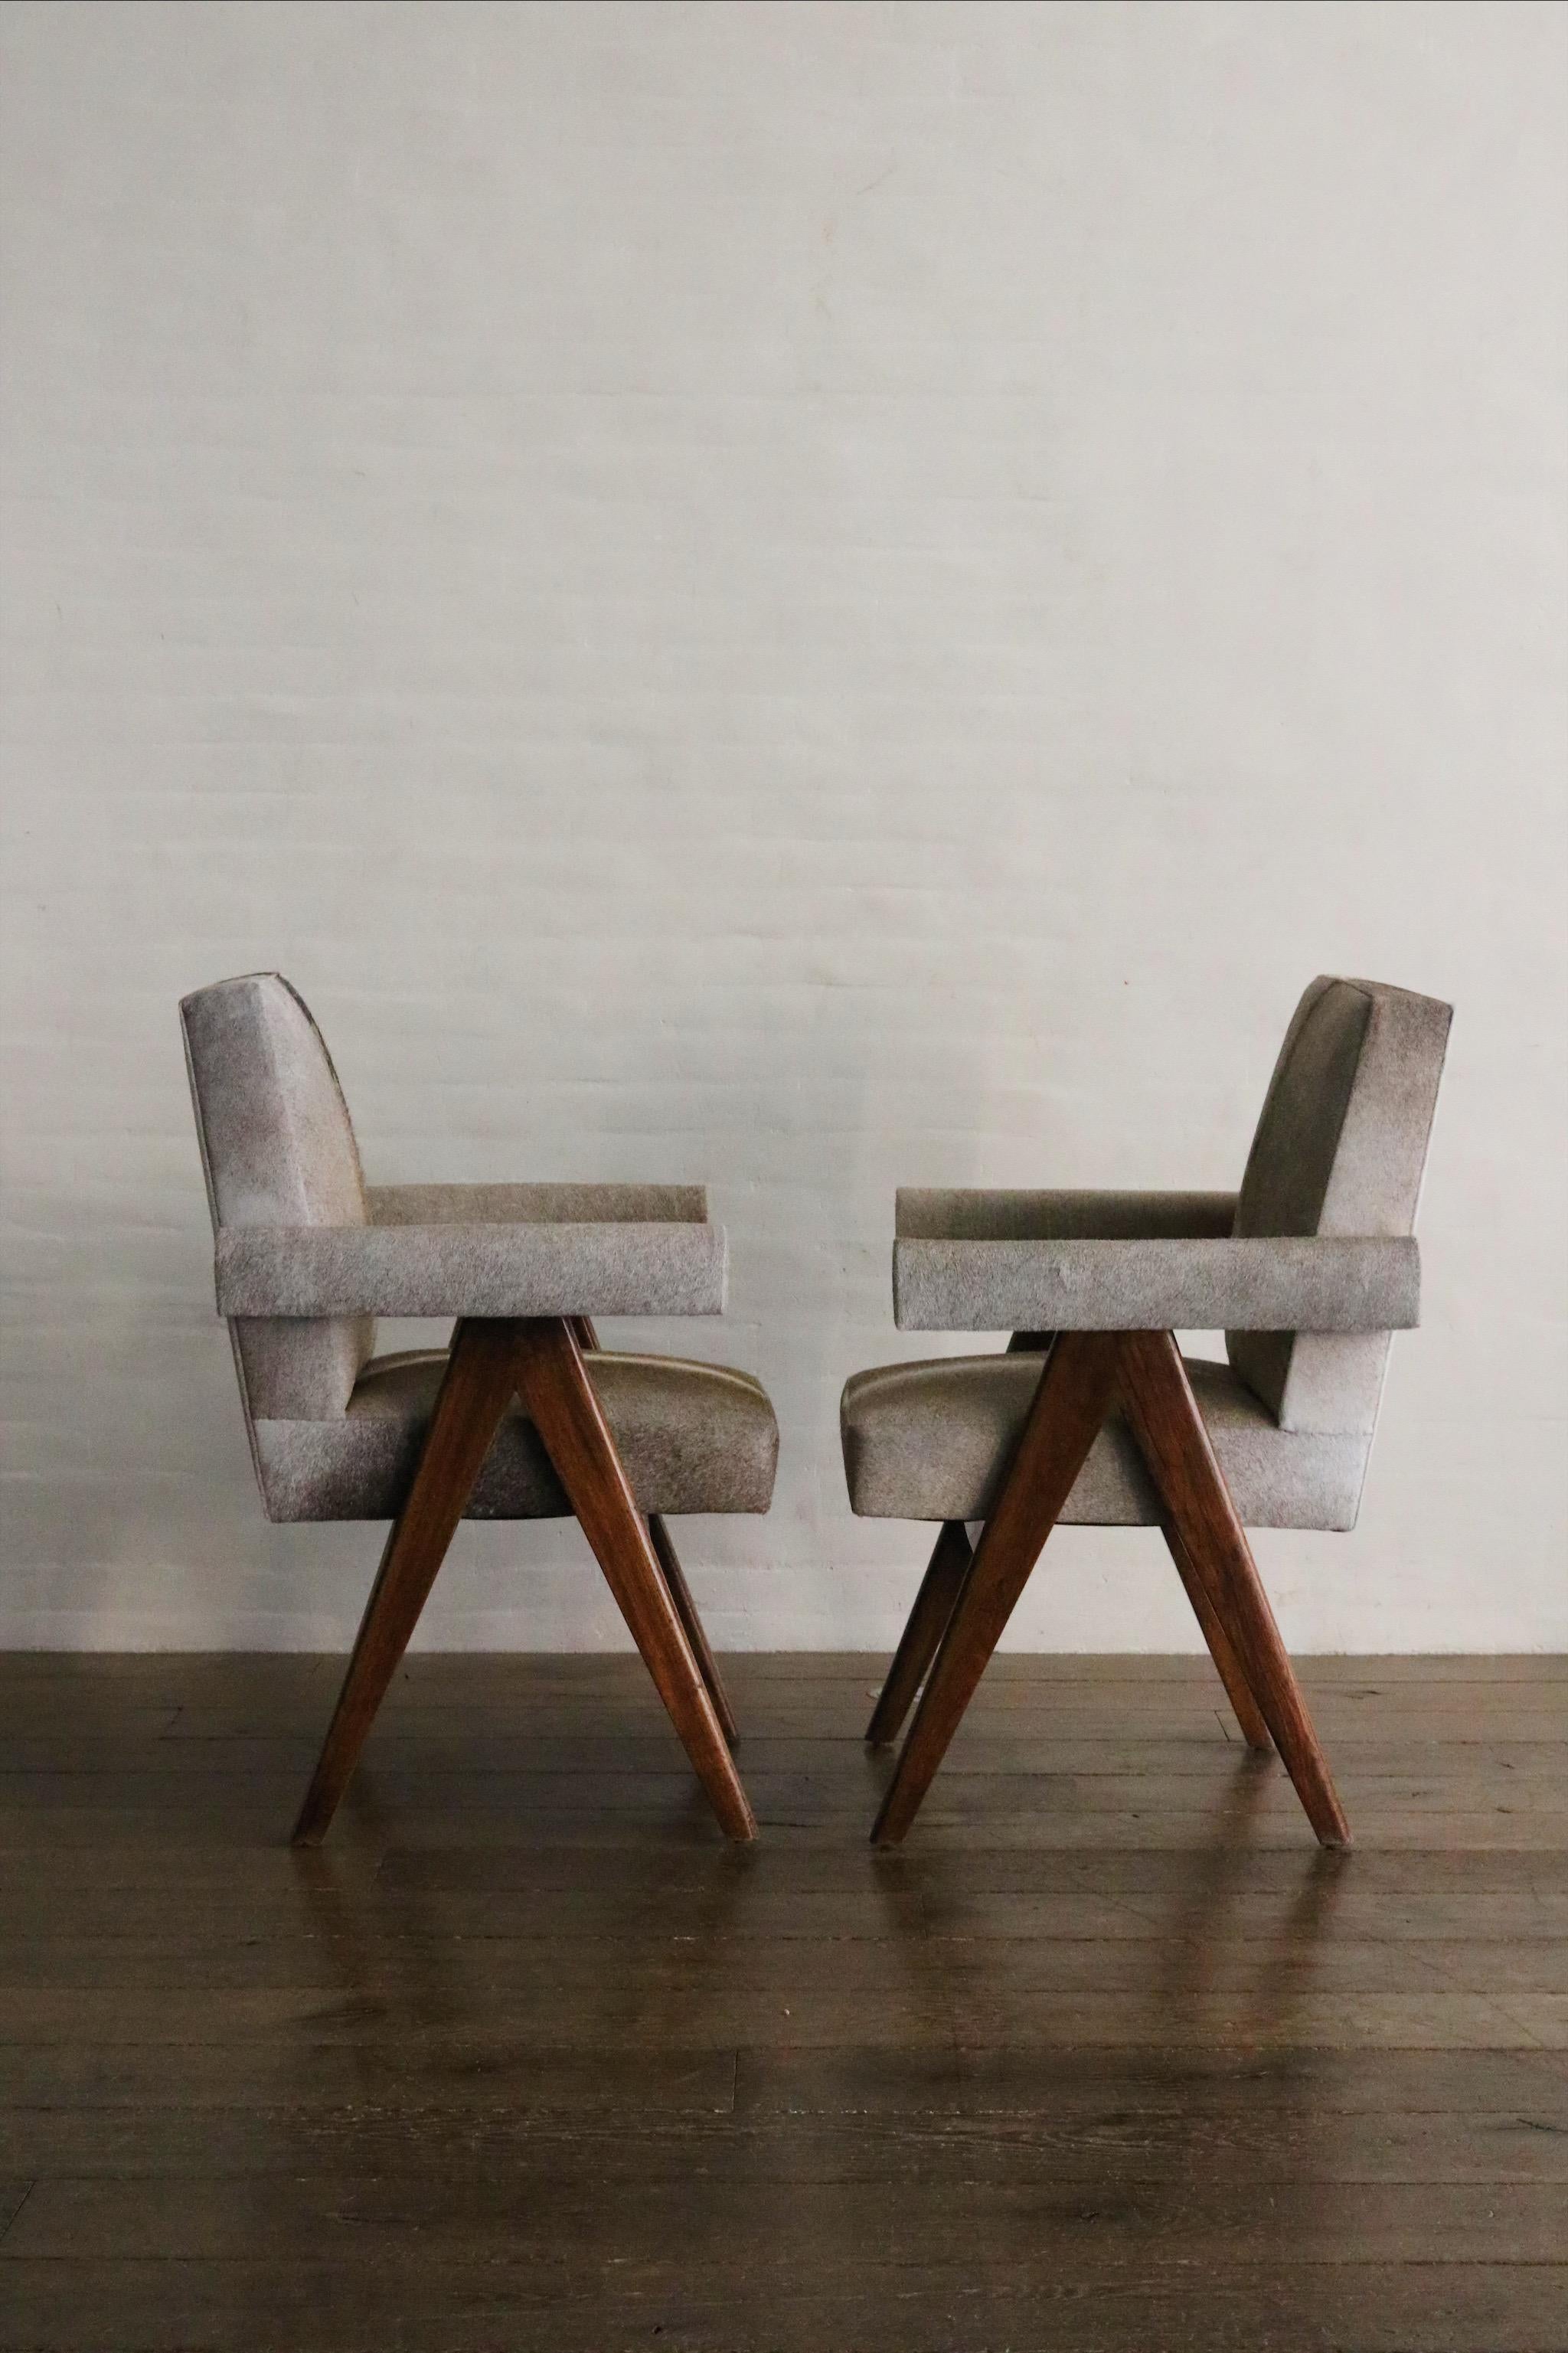 Pierre Jeanneret Senate-Comittee Reupholstered Arm Chair in Teak, ca. 1950s In Good Condition For Sale In New York, NY